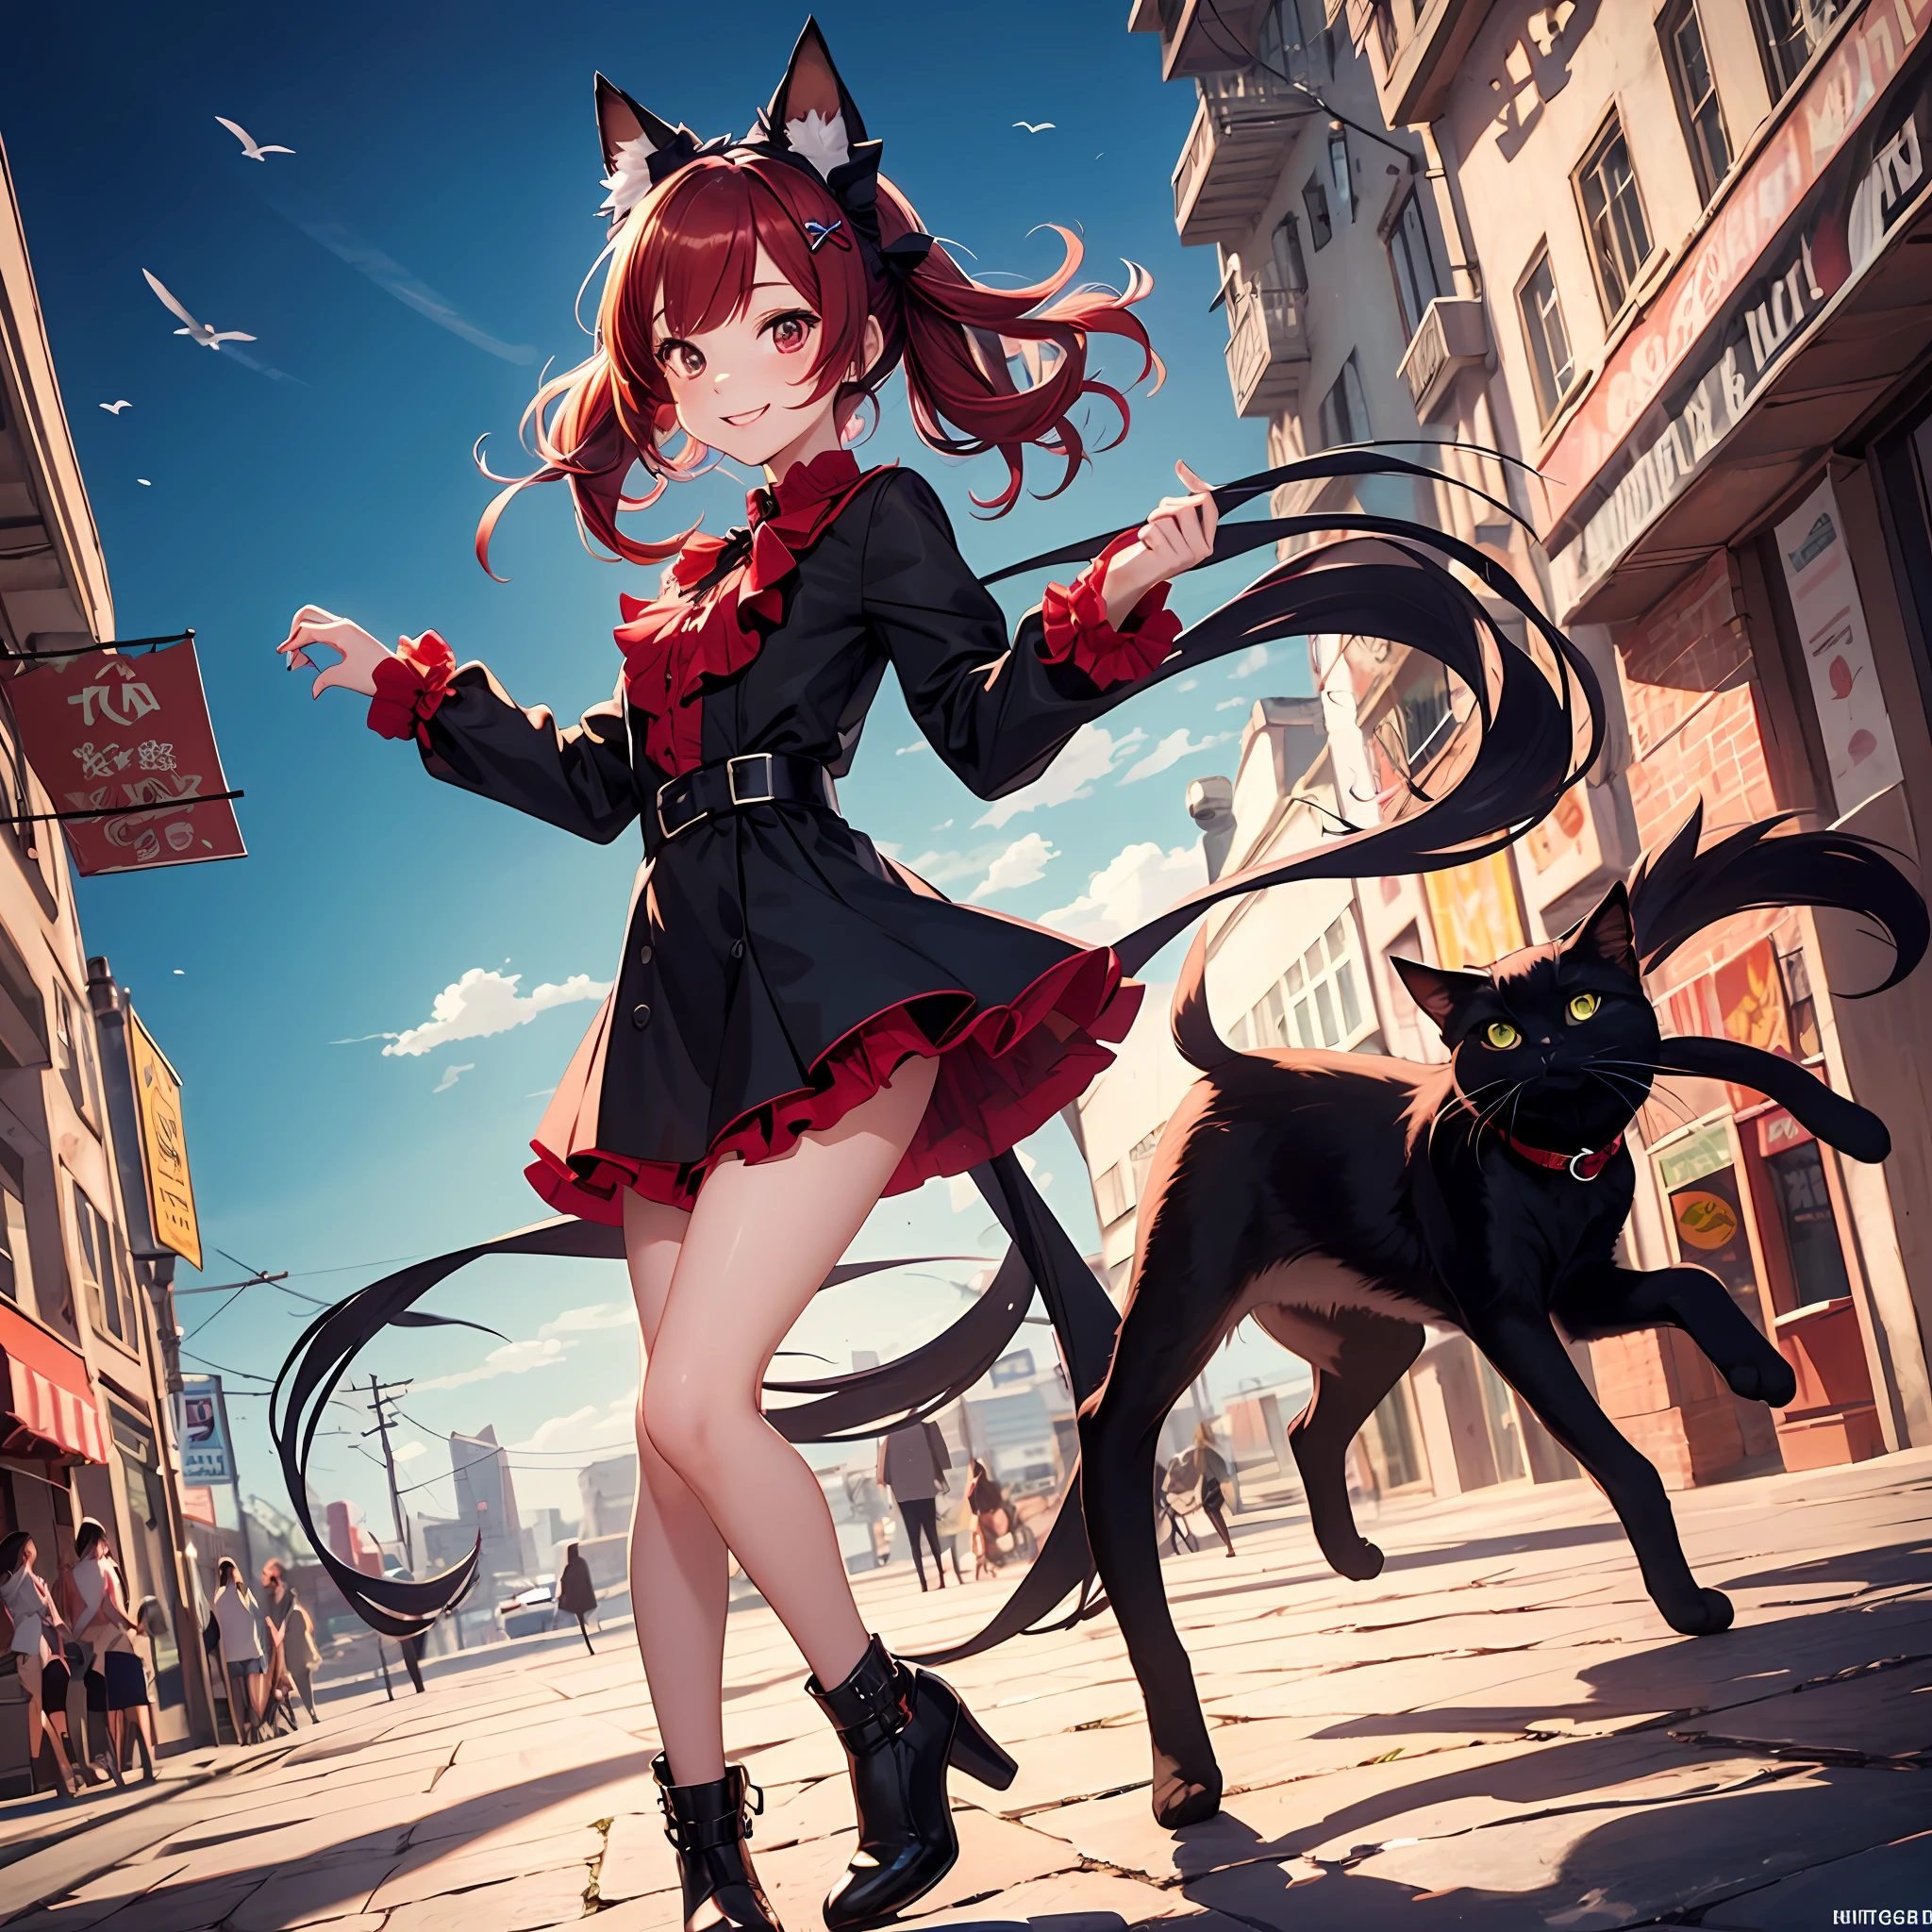 Anime girl with red hair and black cat ears walking down a street 